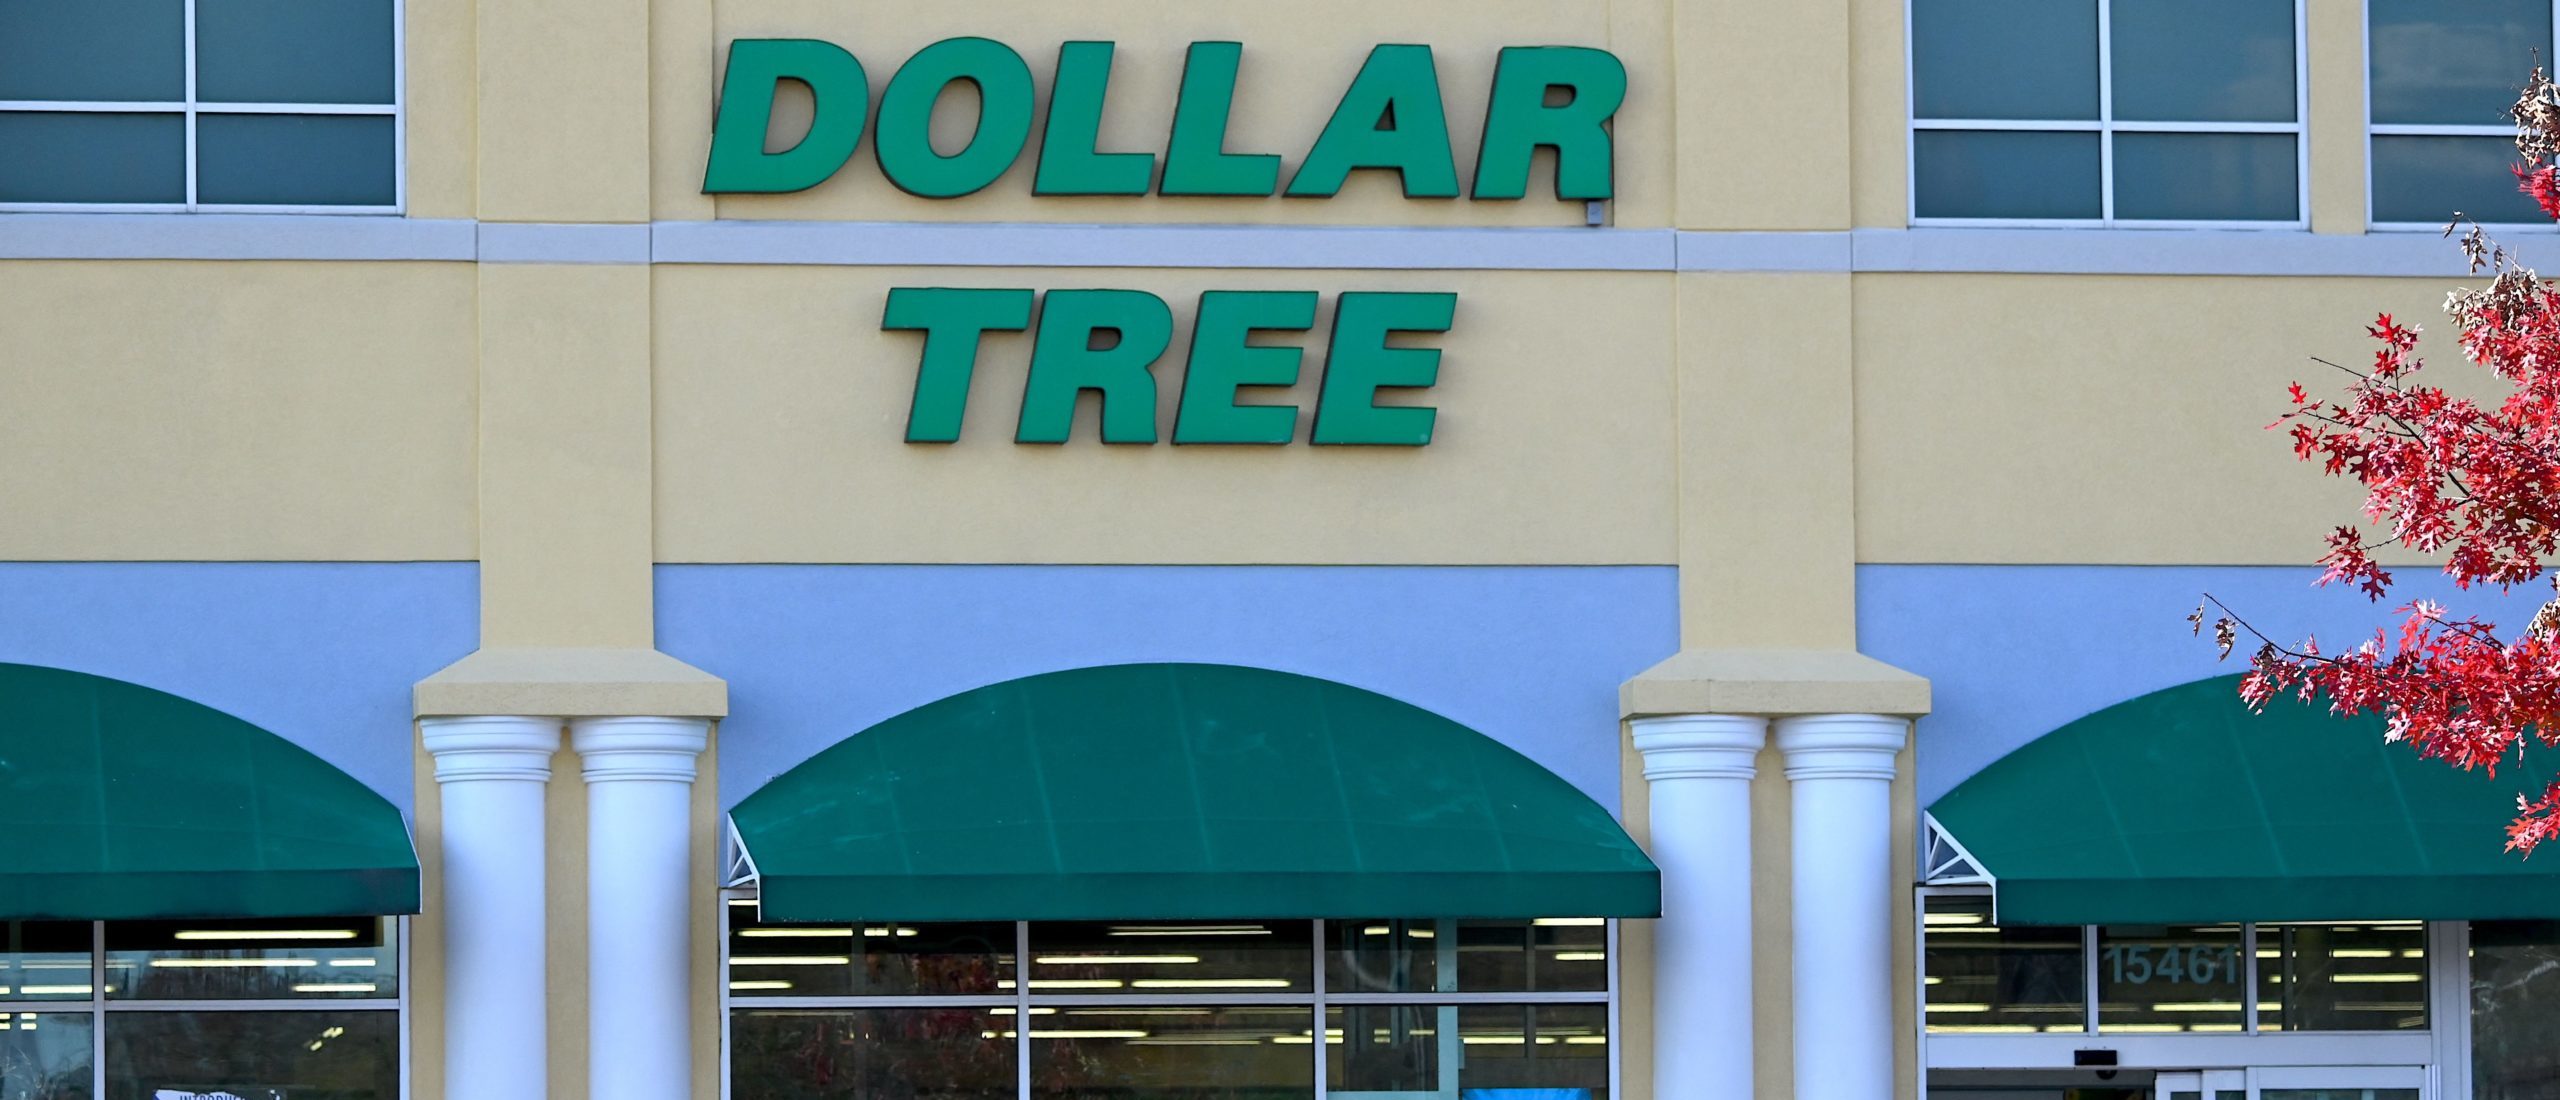 The Dollar Tree logo on its store in Bowie, Maryland, on November 23, 2021. - (Photo by JIM WATSON/AFP via Getty Images)